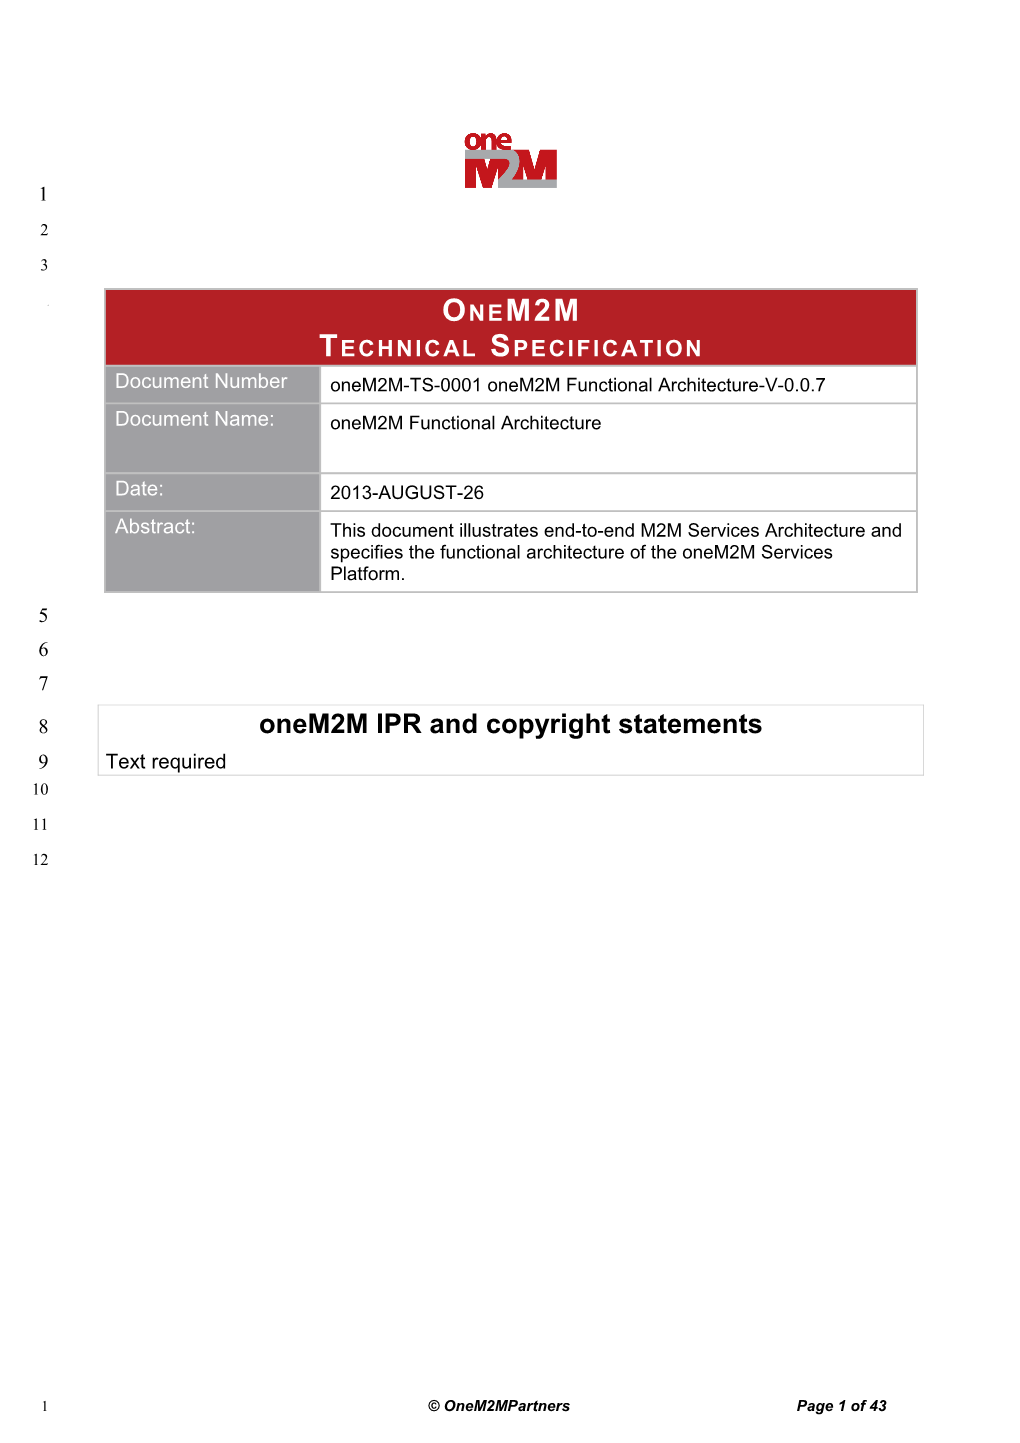 Onem2m IPR and Copyright Statements